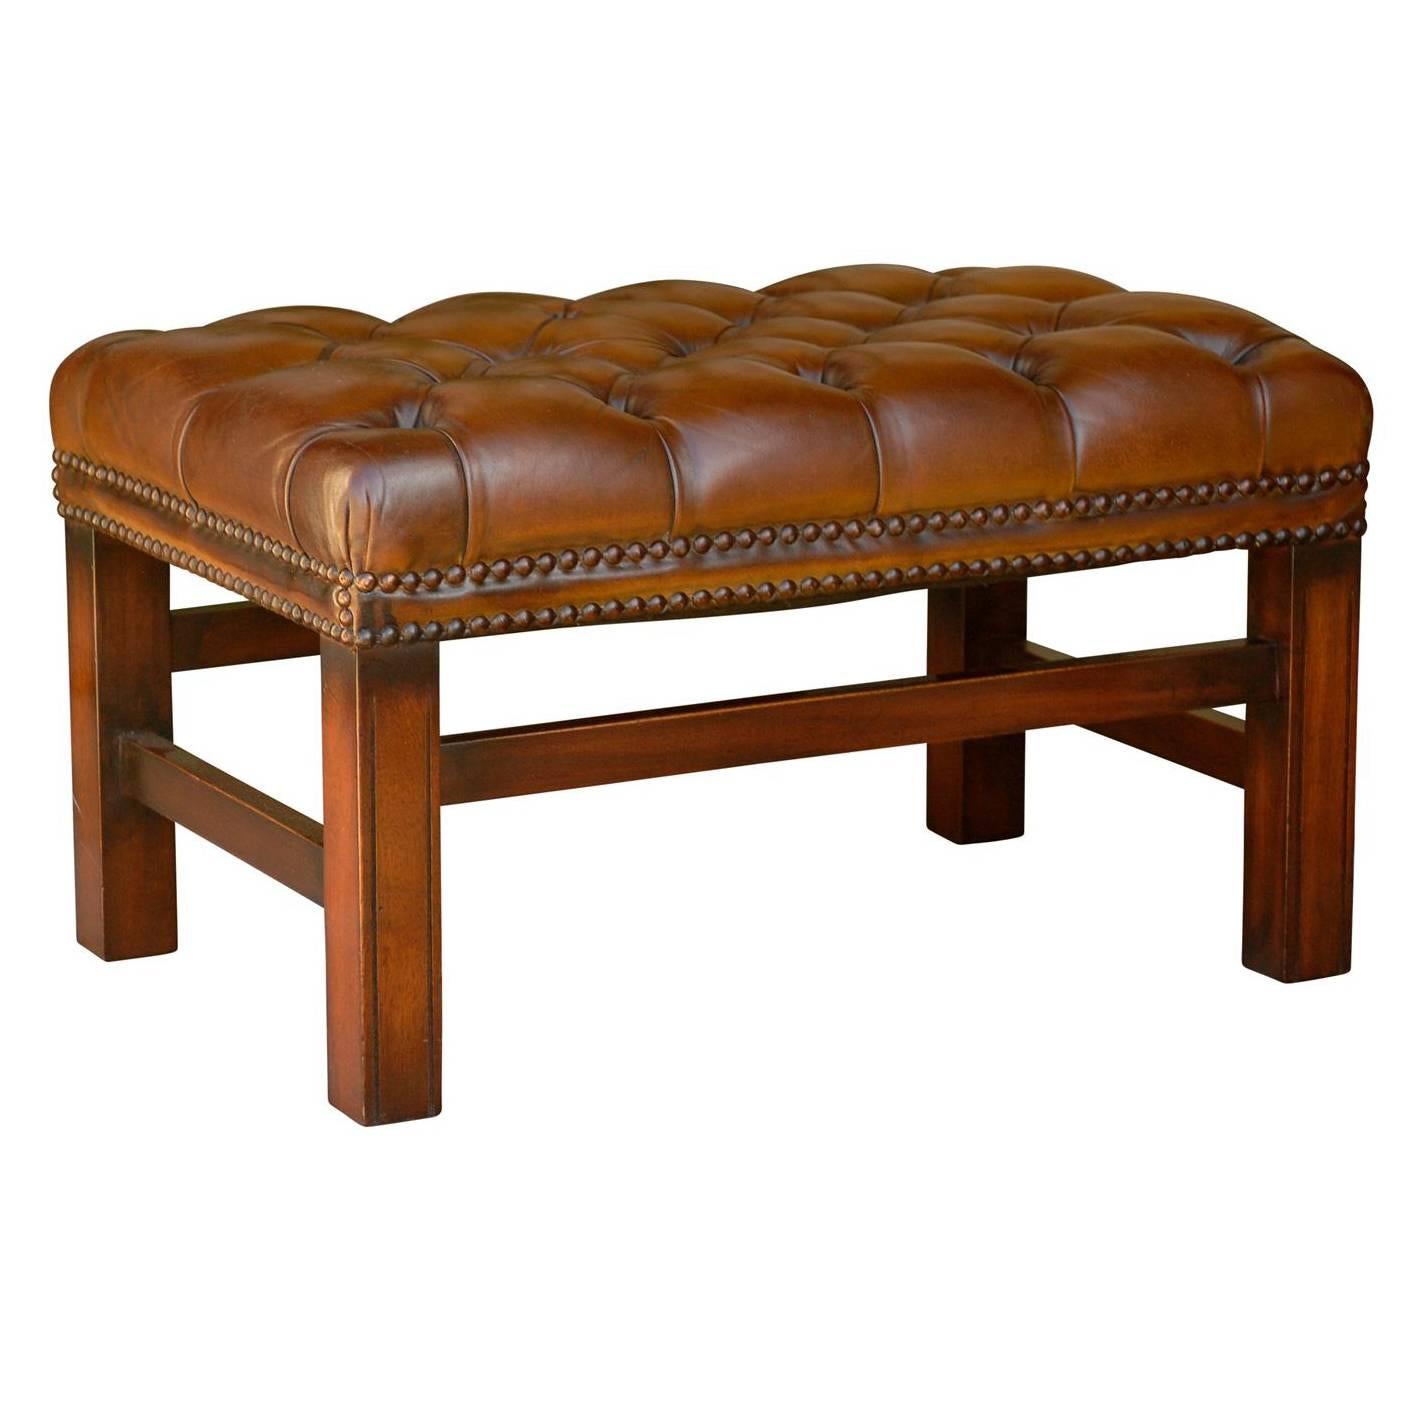 English Mid-Century Wooden Bench with Brown Tufted Leather Seat For Sale